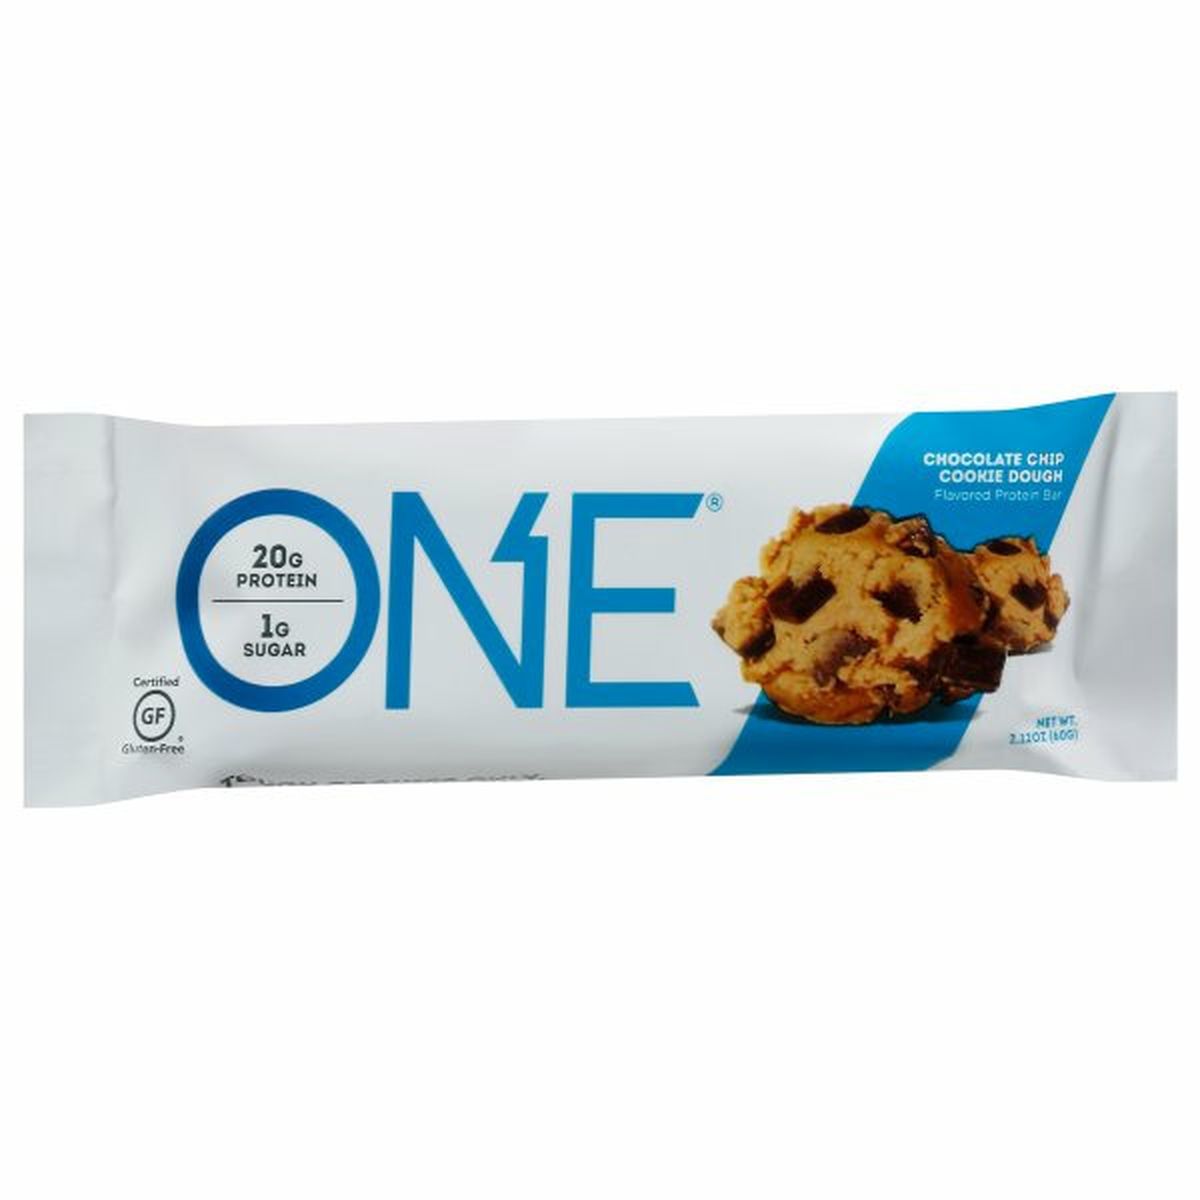 Calories in One Protein Bar, Chocolate Chip Cookie Dough Flavored